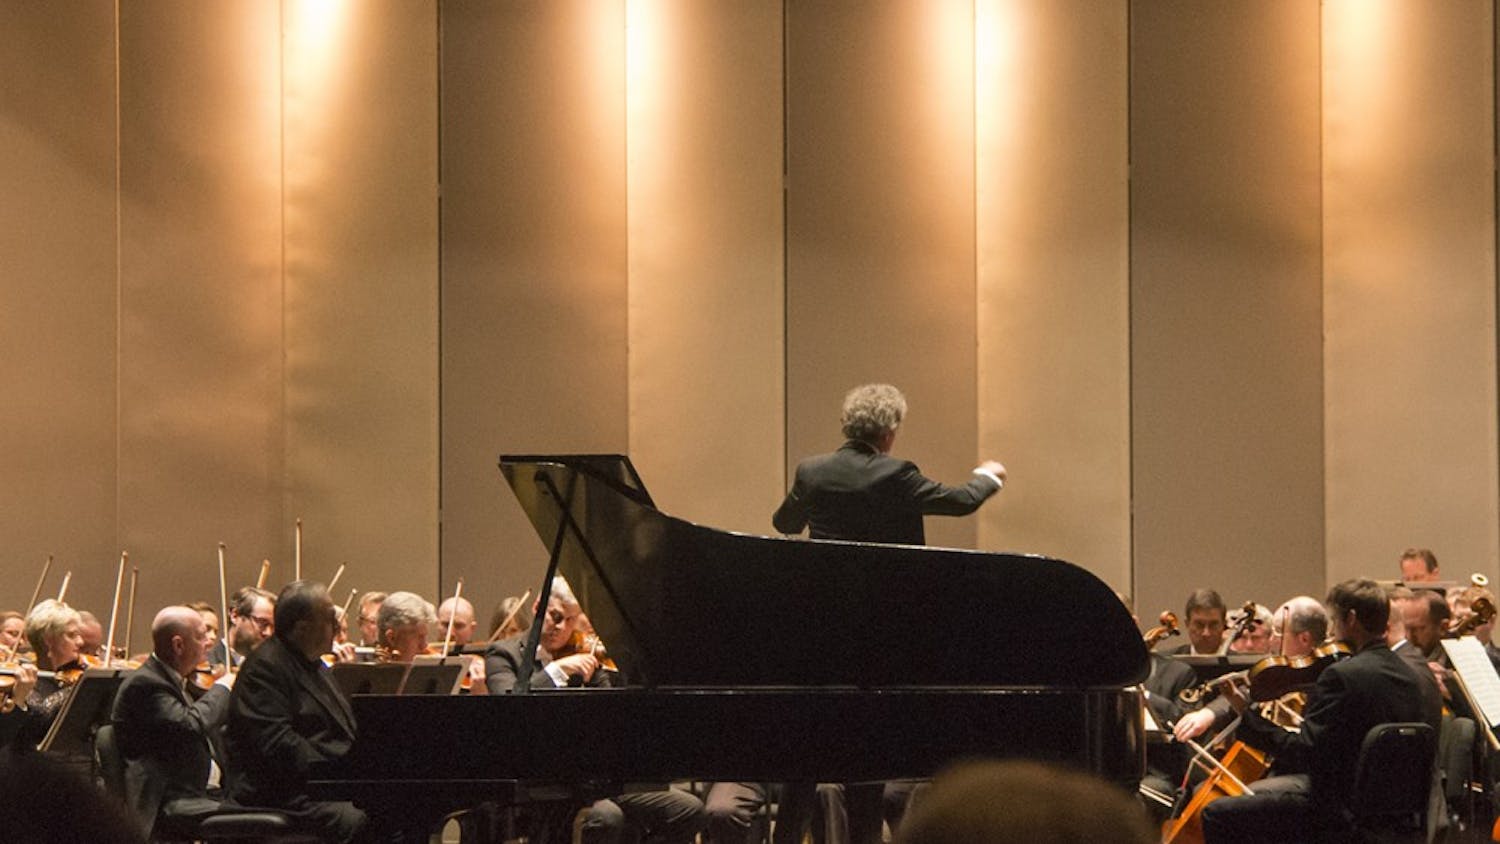 Pianist Yefim Bronfman watches Conductor Franz Welser-Möst during a section of rest in "Piano Concerto No. 2 in G Major" by Pytor Ilyich Tchaiovsky on&nbsp;Thursday evening in the IU Auditorium.&nbsp;